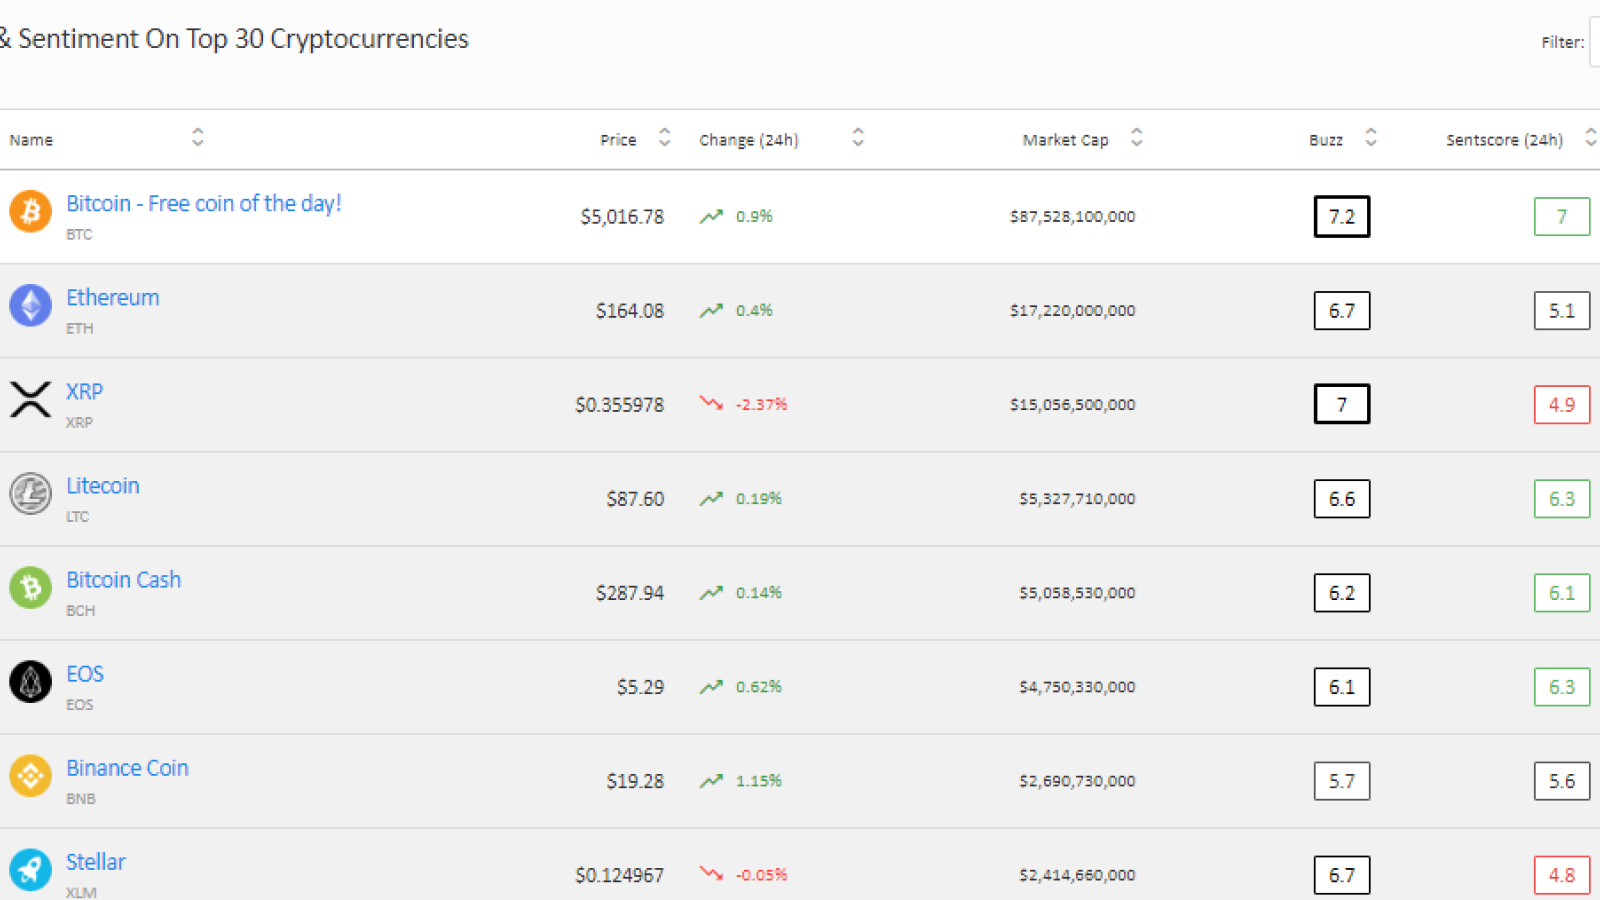 Tron (TRX), BNB marked as the most trending coins in 2019